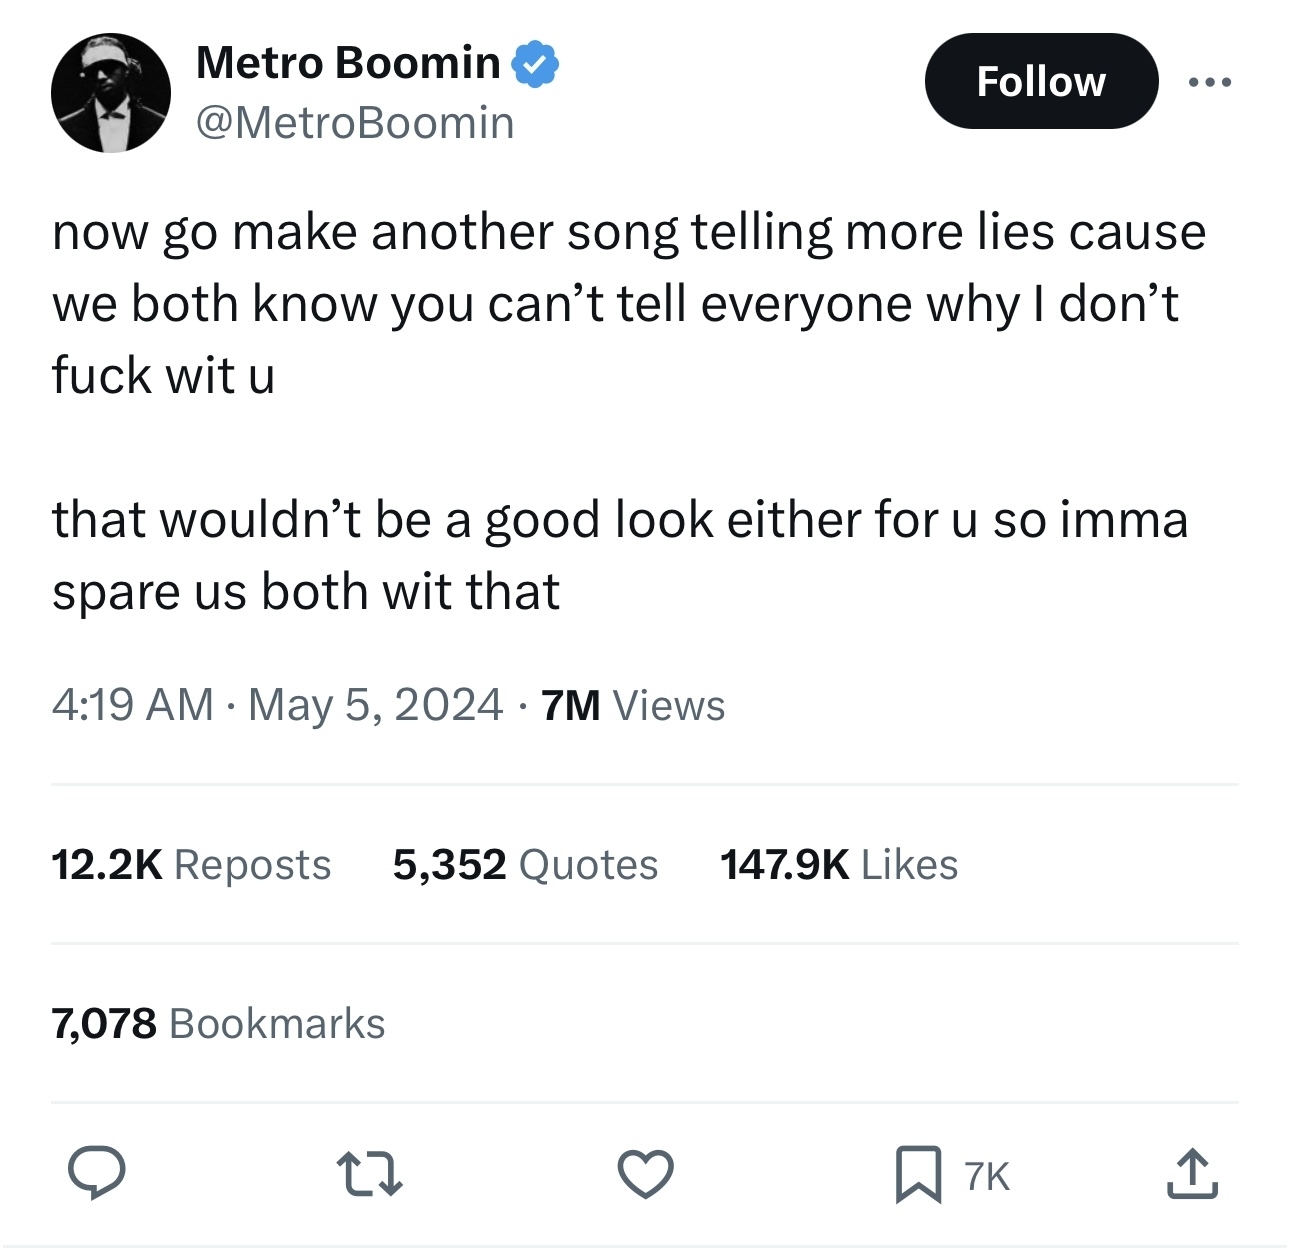 Screenshot of a tweet from Metro Boomin expressing frustration with someone in a cryptic message